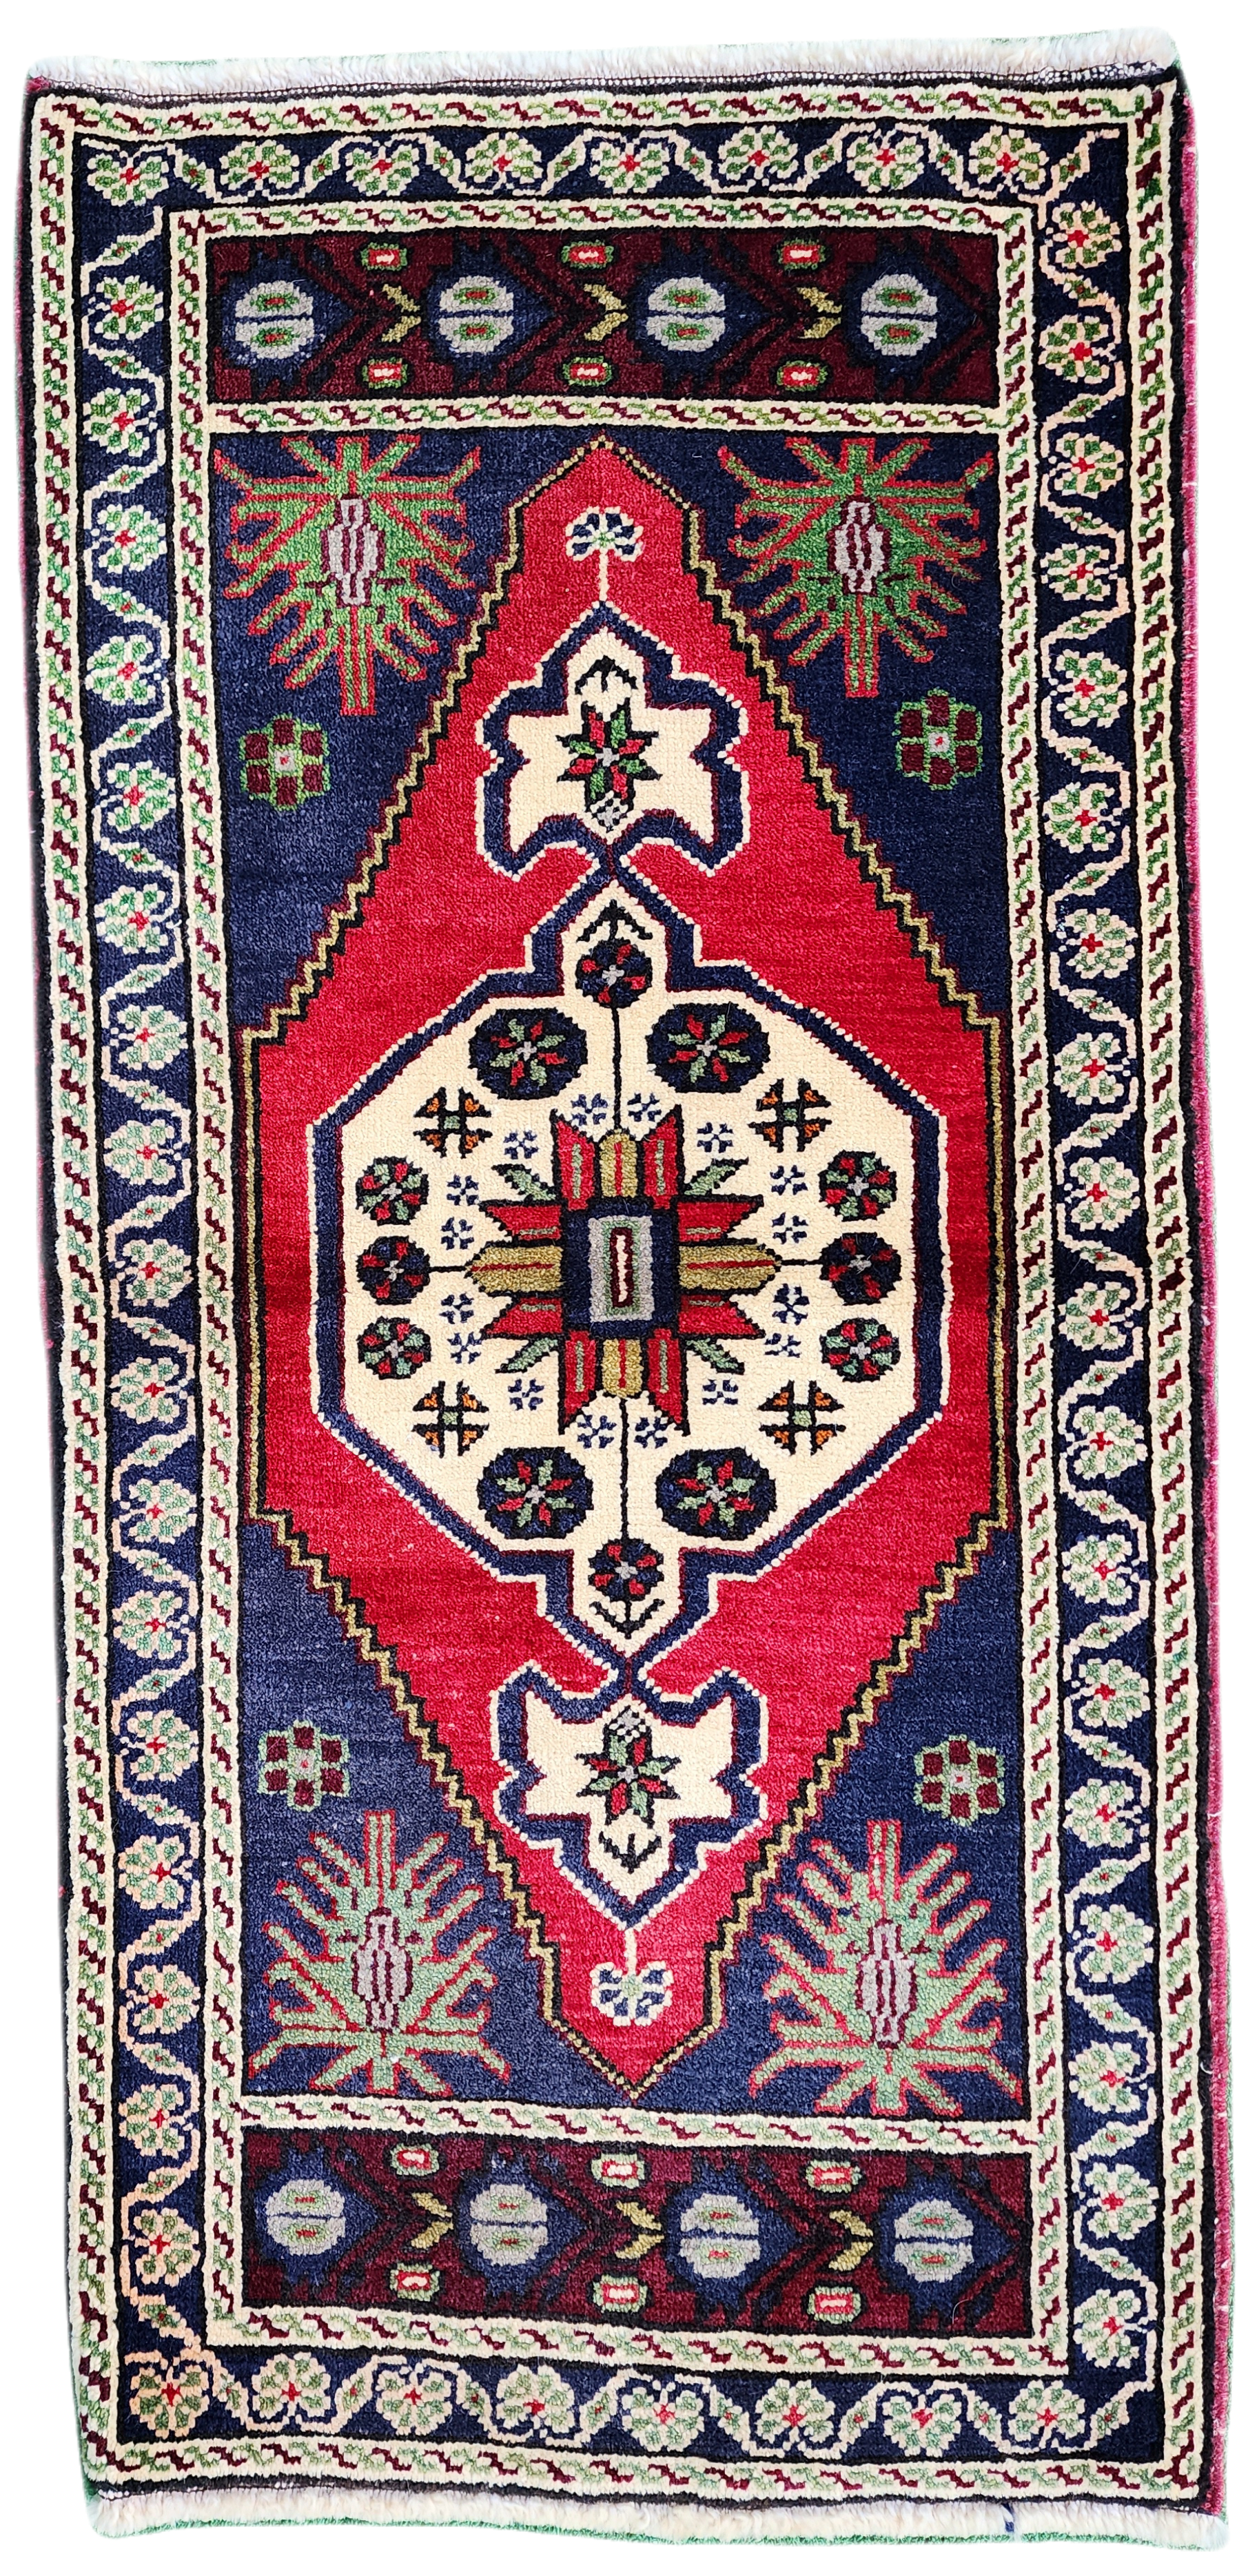 Red Blue Small Turkish Rug 3 ft 5 in x 1 ft 7 in Vintage Rug for Entry, Kitchen, Hallway or Bedroom